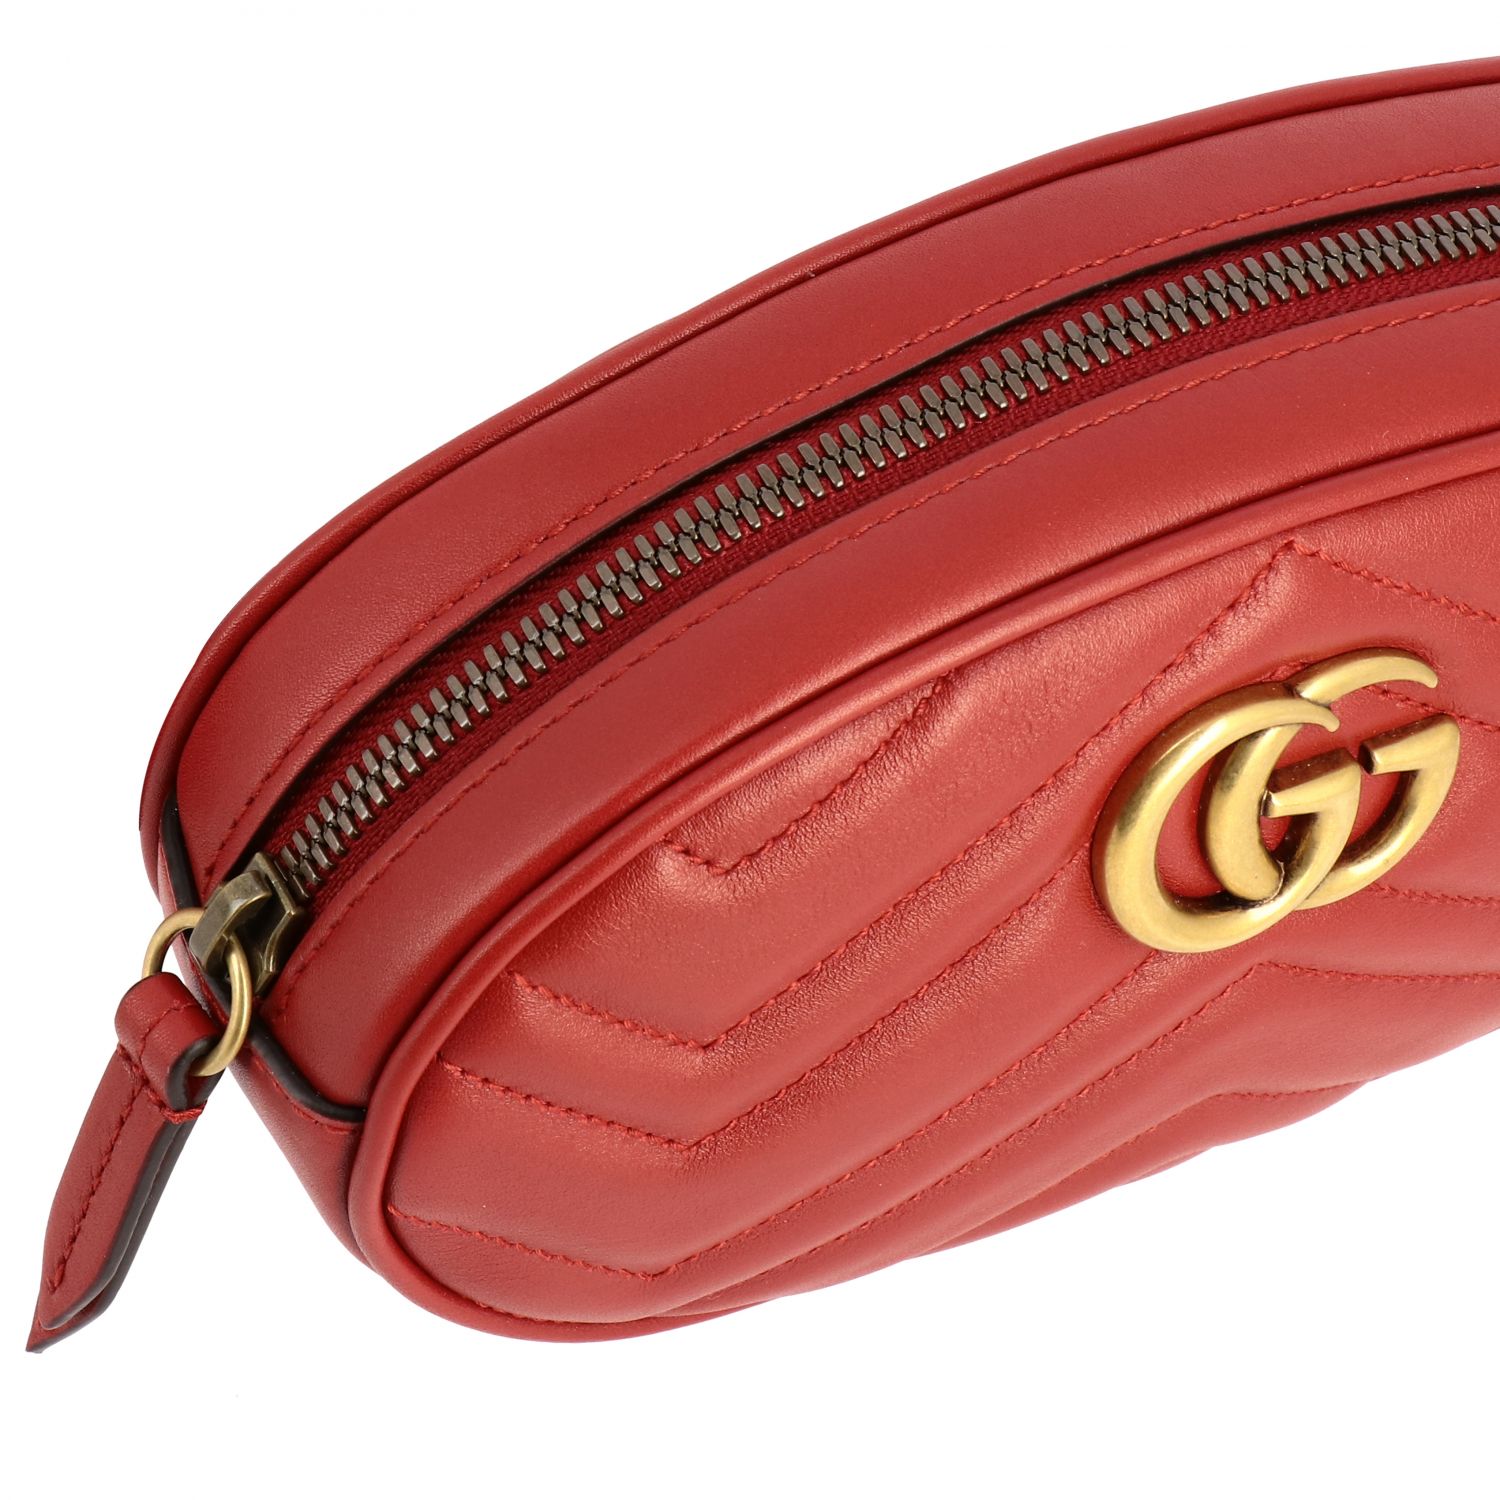 GUCCI: GG Marmont belt bag in chevron leather - Red | Belt Bag Gucci